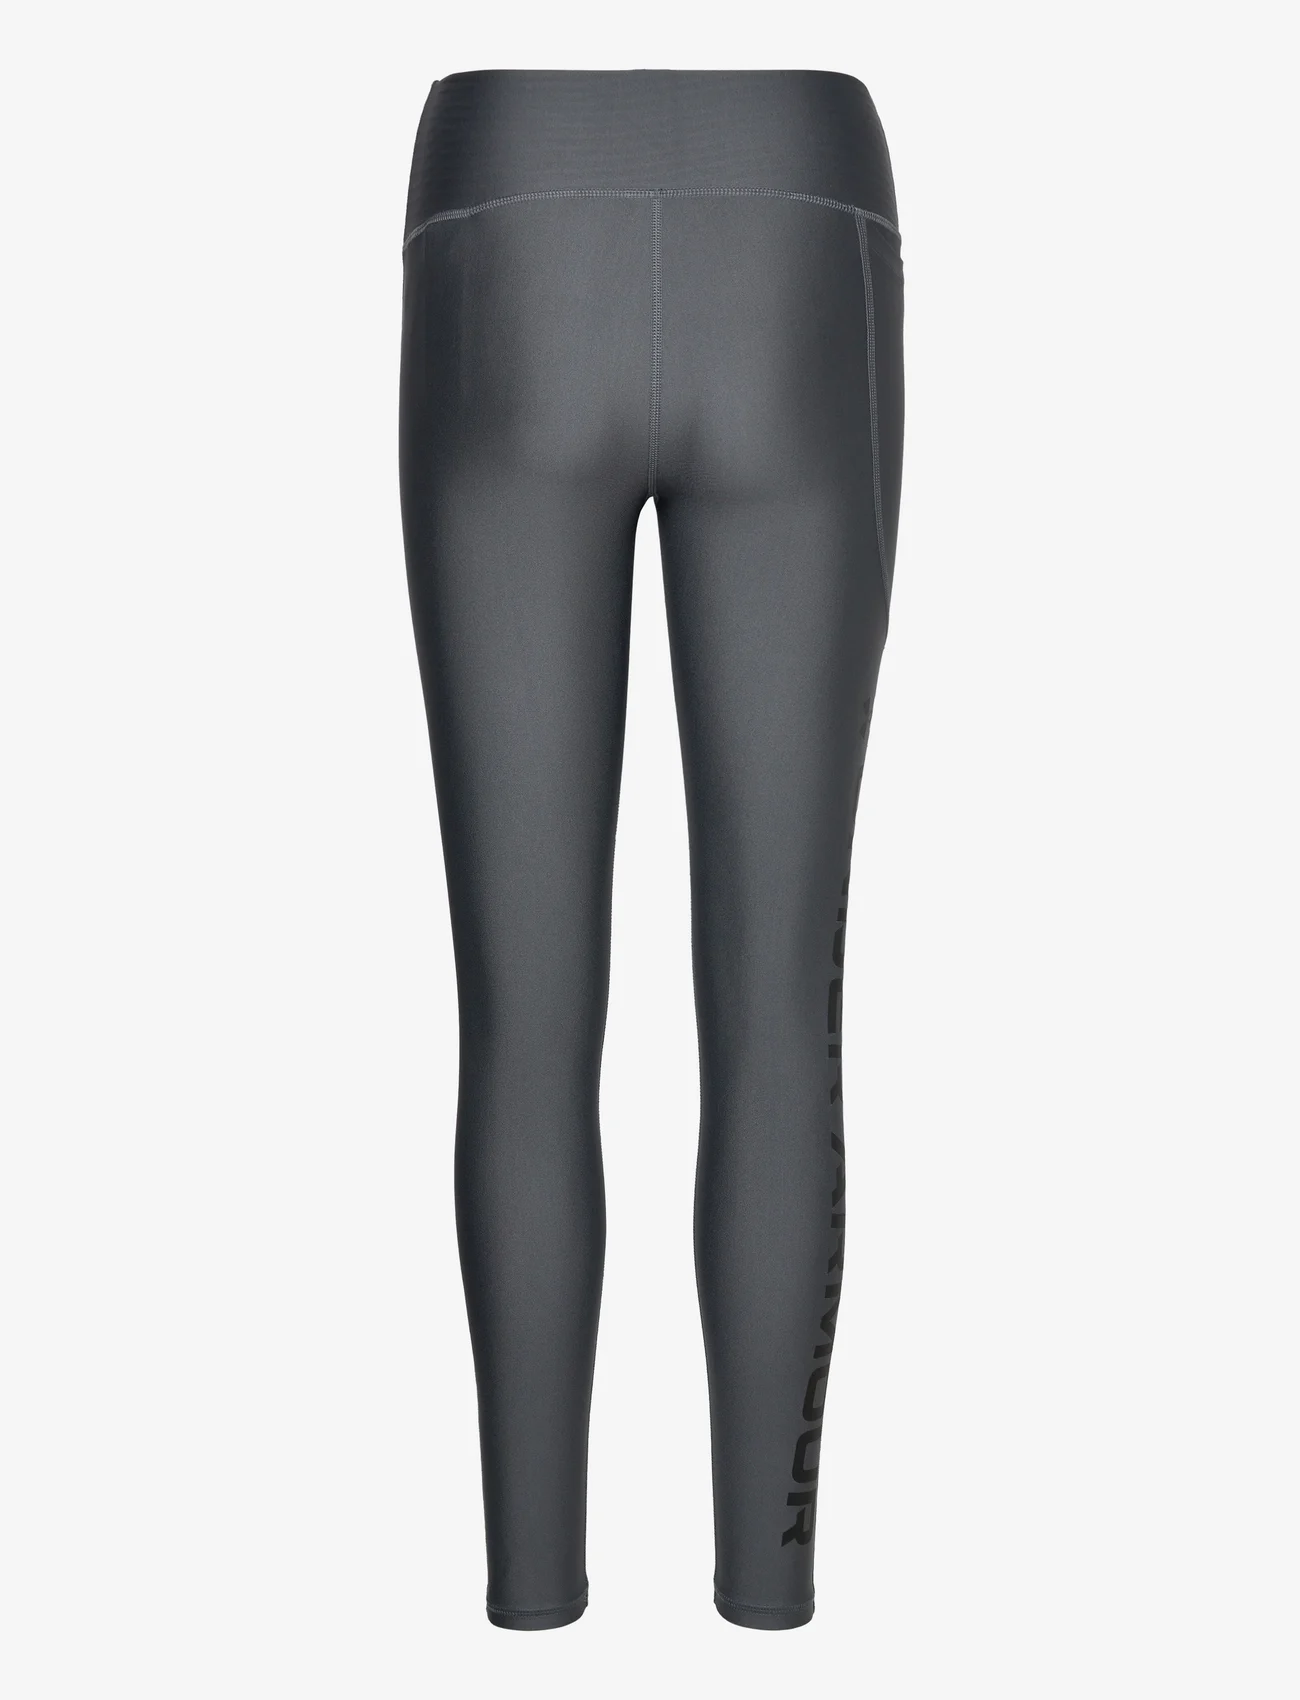 Under Armour - Armour Branded Legging - trænings- & løbetights - pitch gray - 1